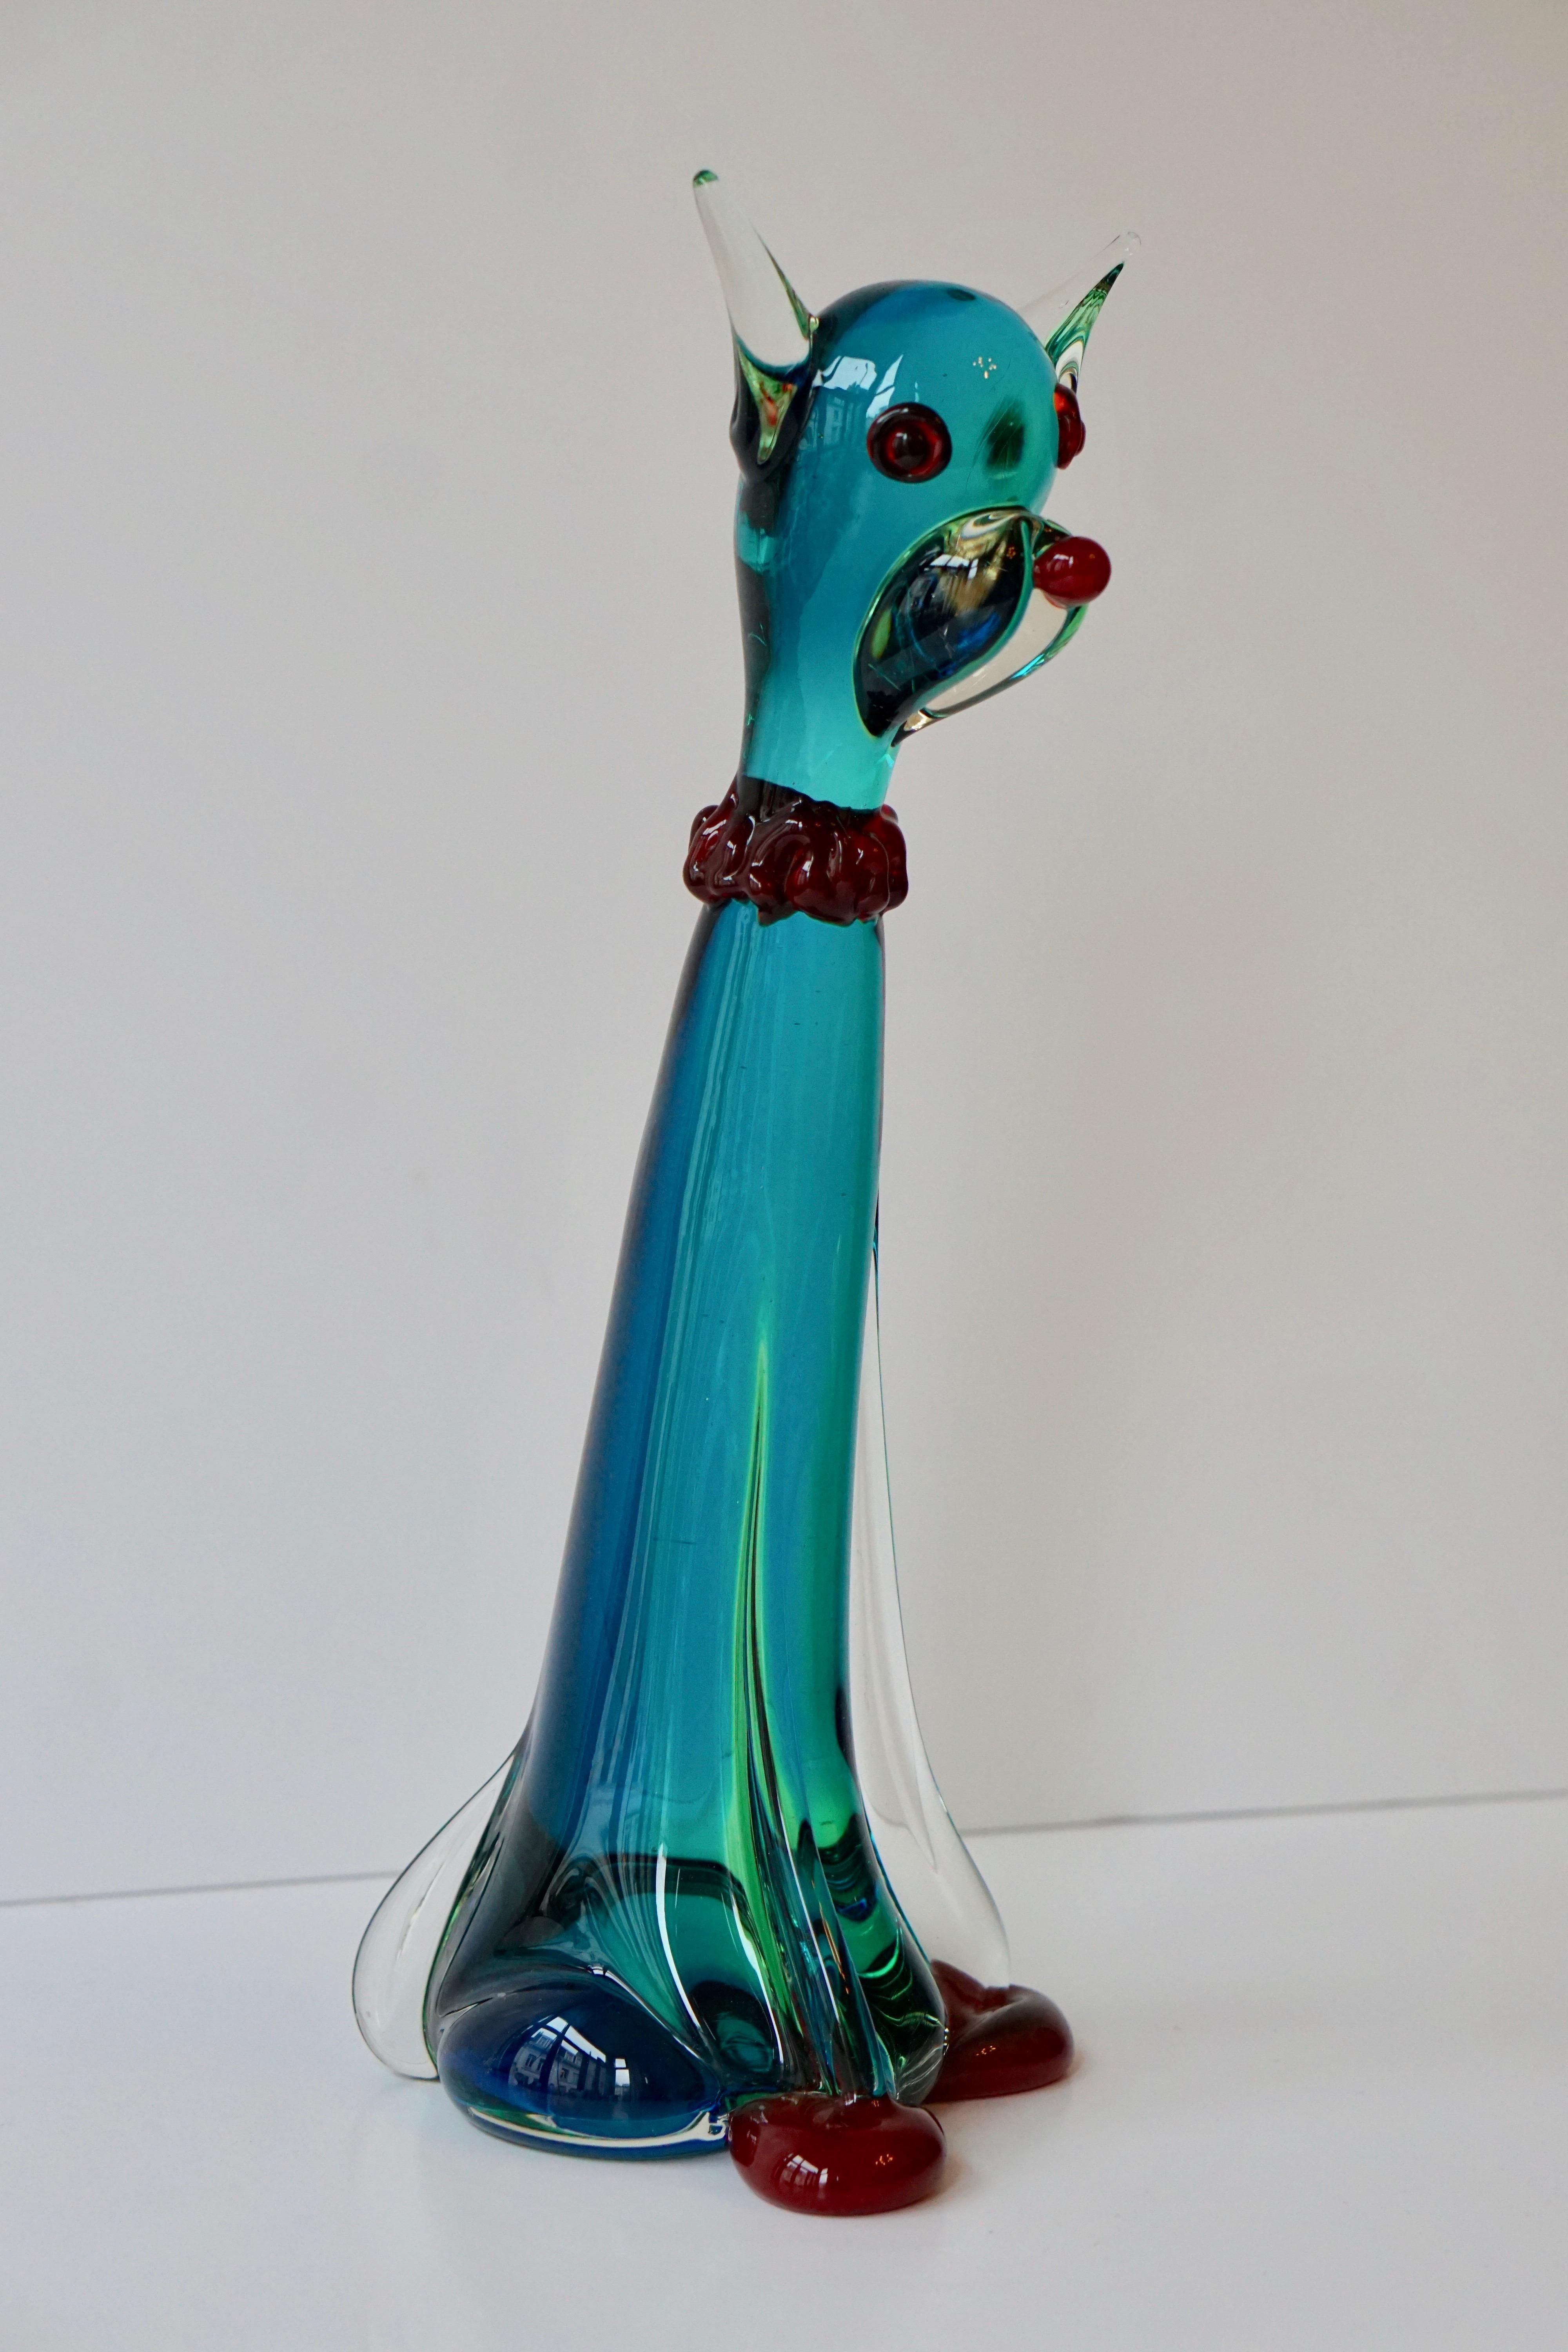 Murano Art Glass Cat Sculpture For Sale at 1stDibs